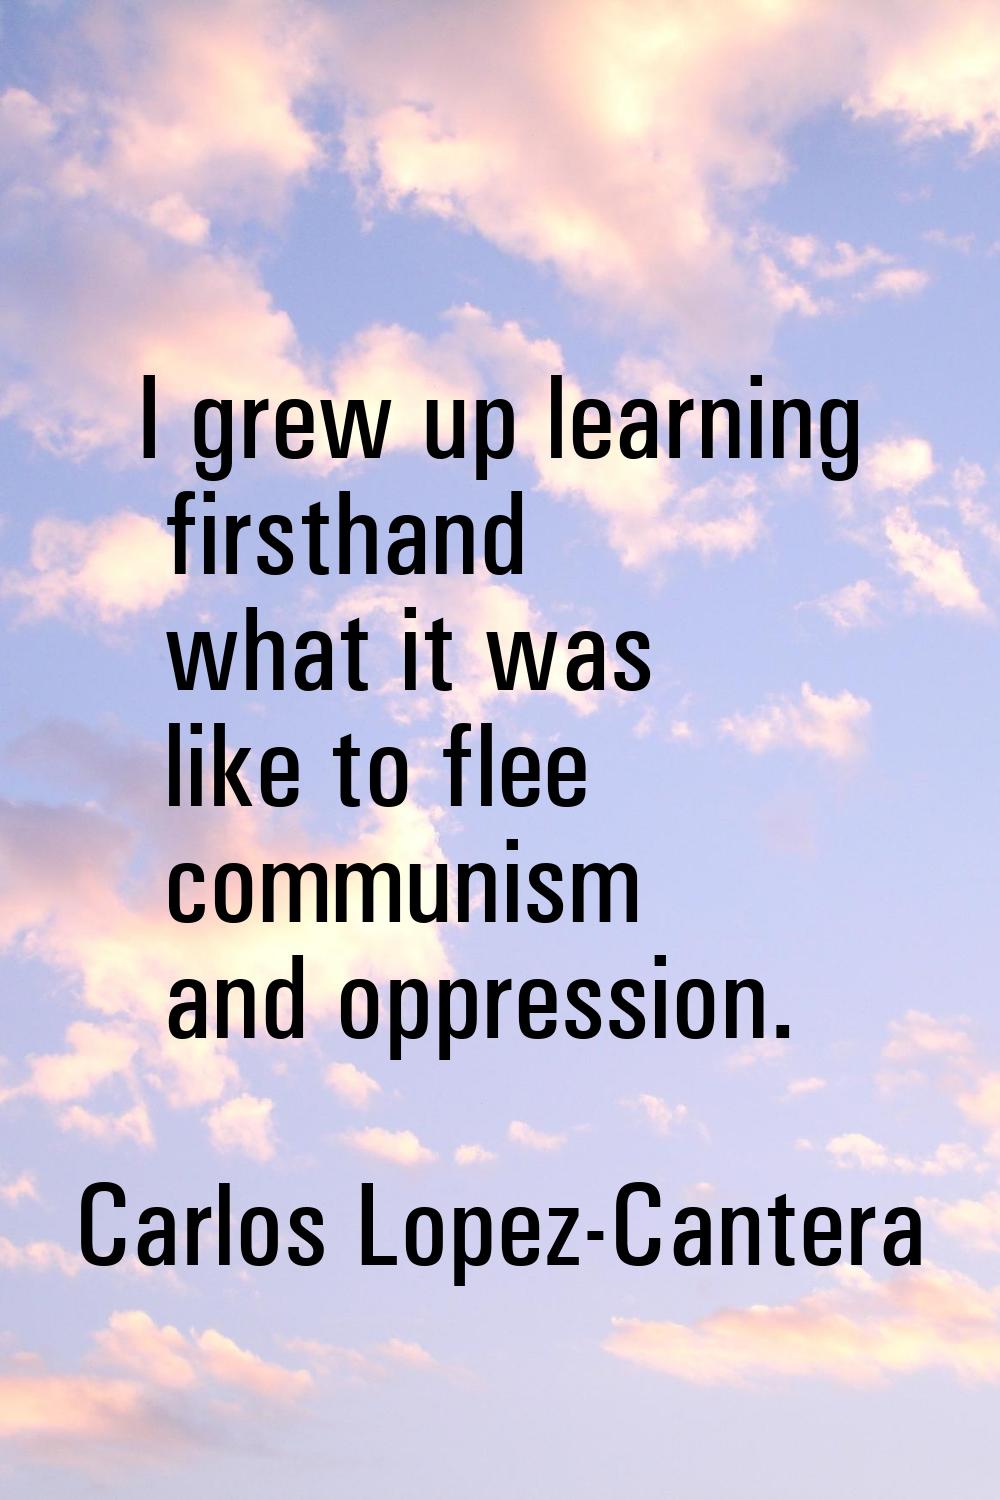 I grew up learning firsthand what it was like to flee communism and oppression.